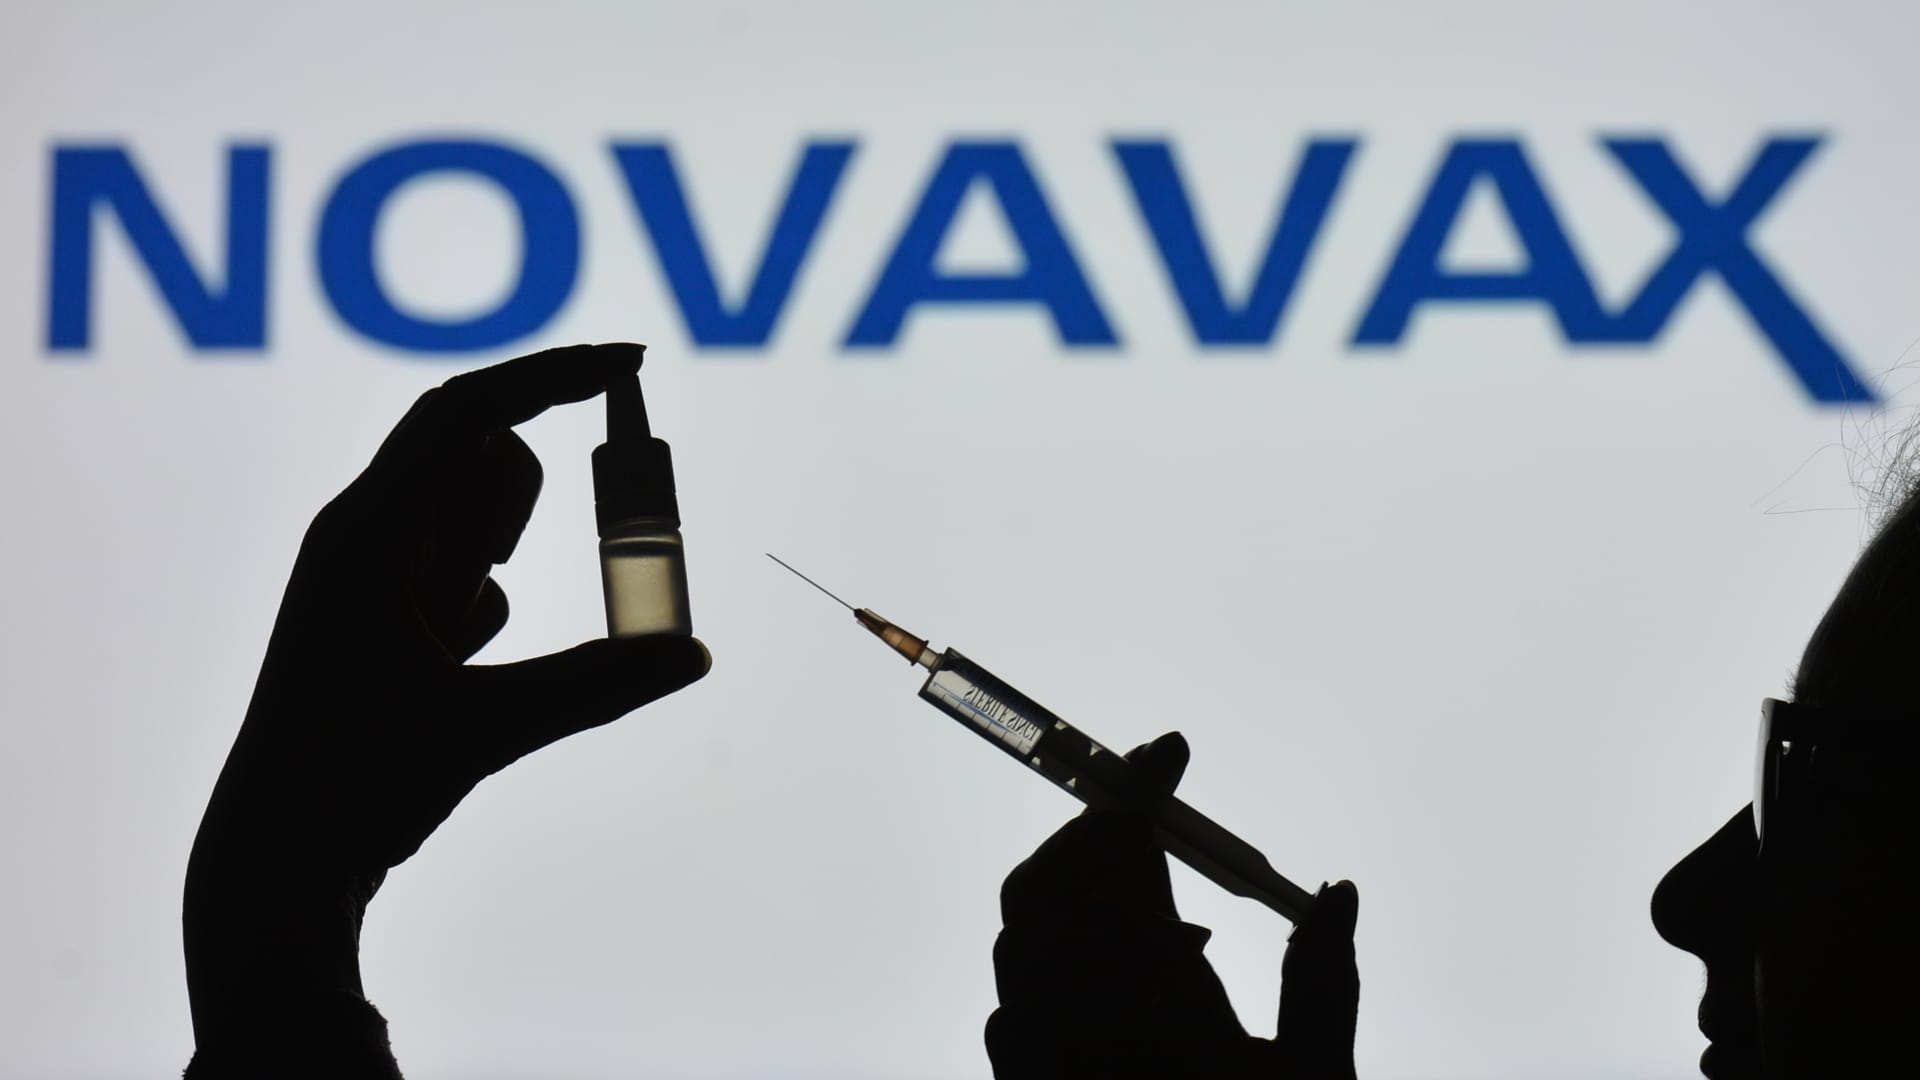 CDC panel unanimously recommends Novavax Covid-19 vaccine for adults